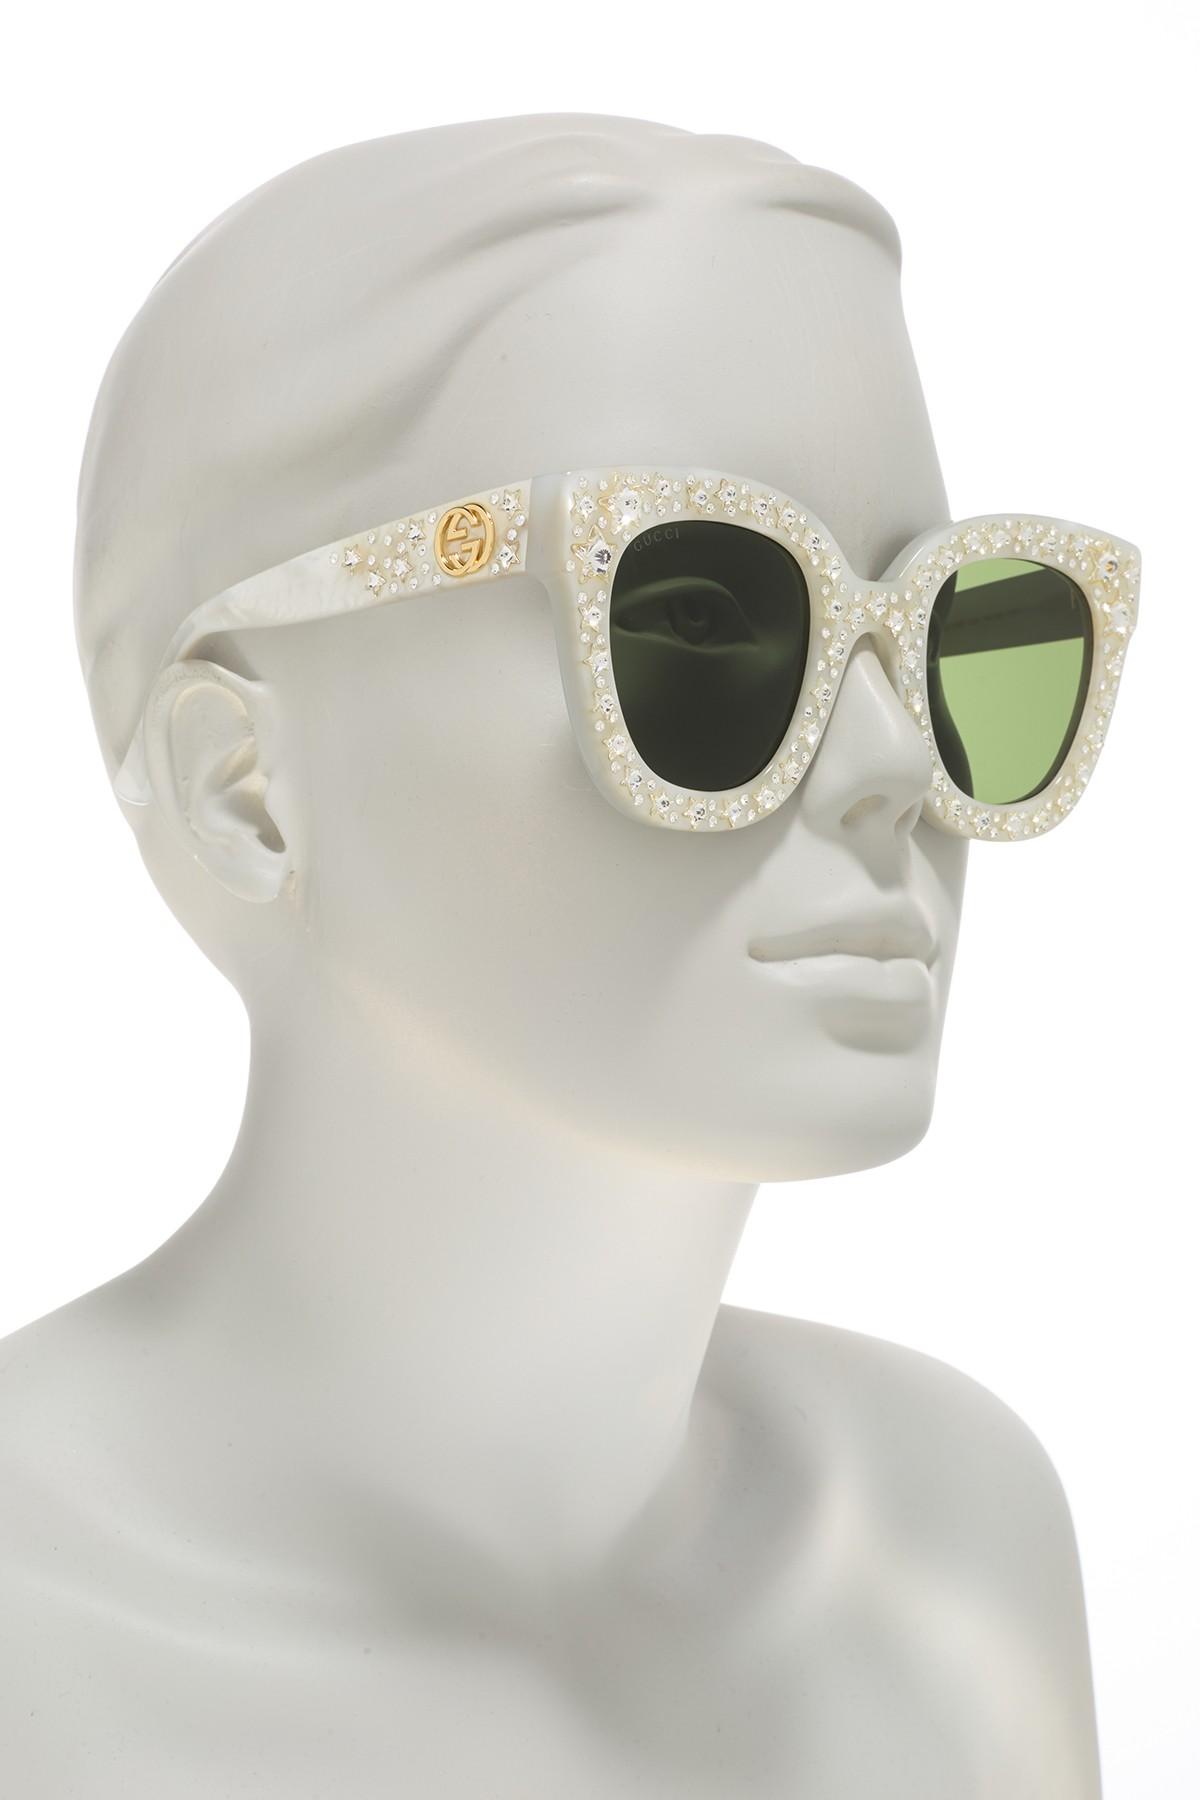 Gucci 49mm Crystal Star Sunglasses in White White Green (White) | Lyst